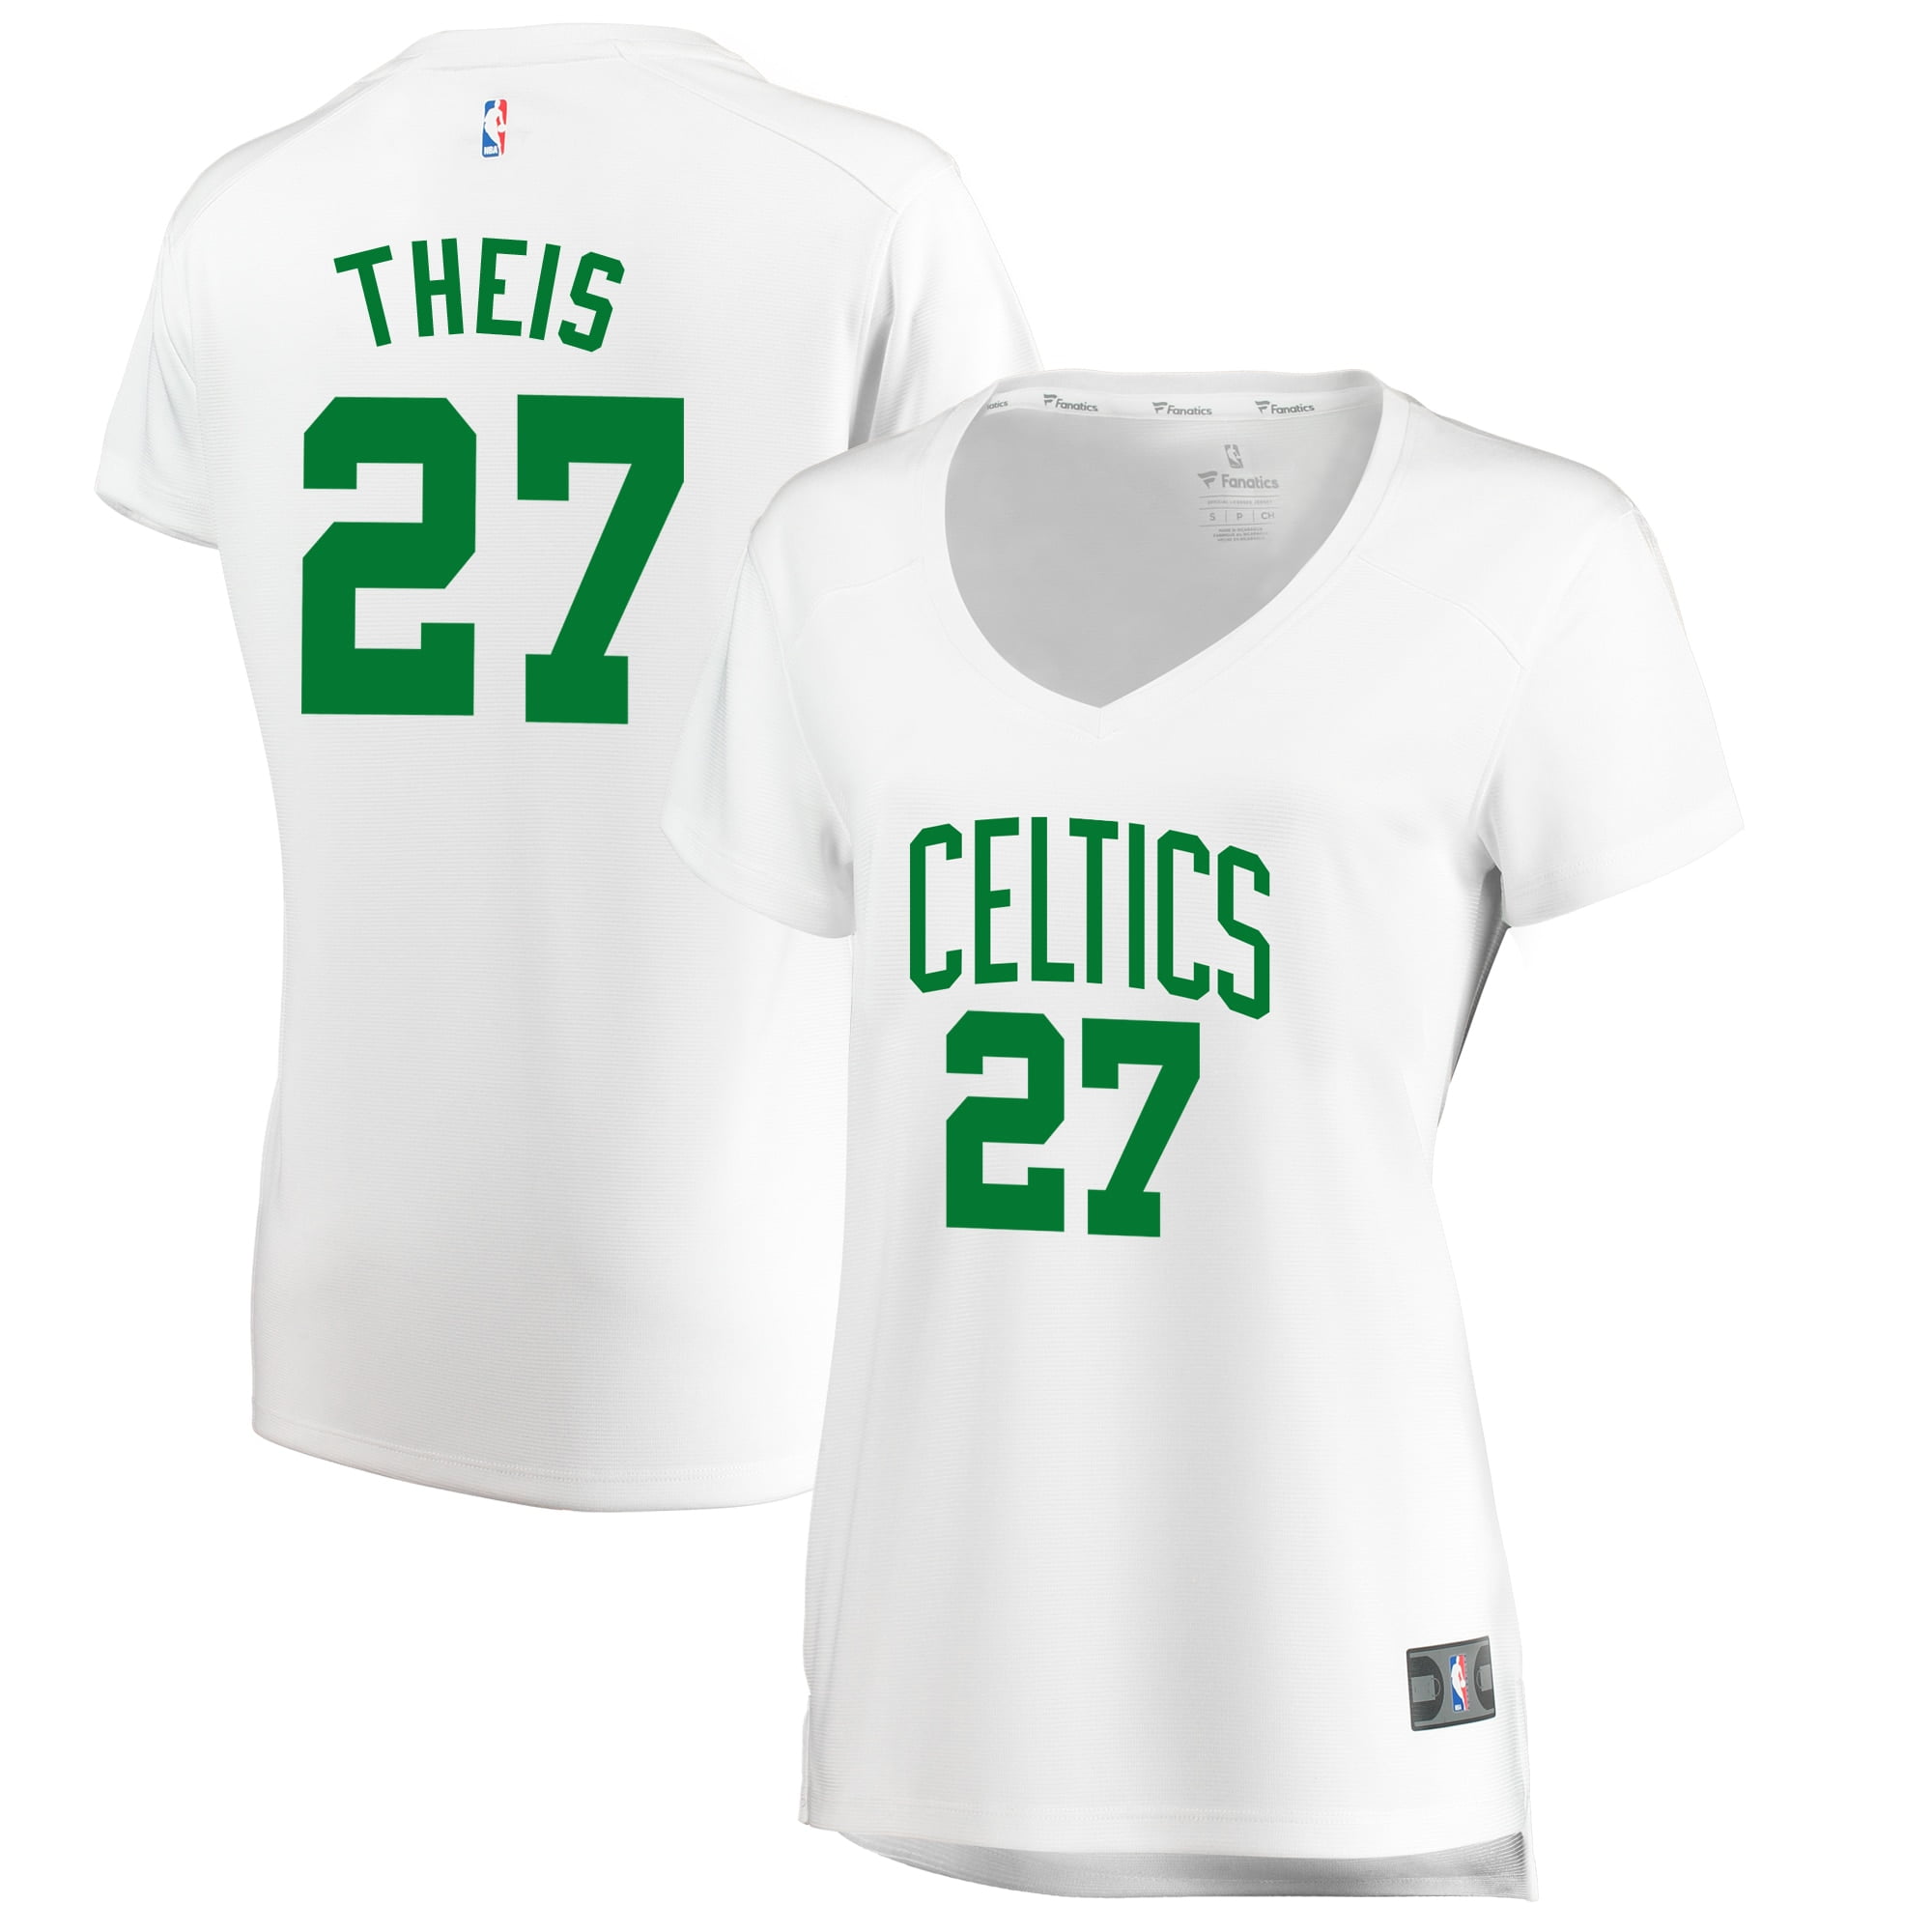 theis jersey